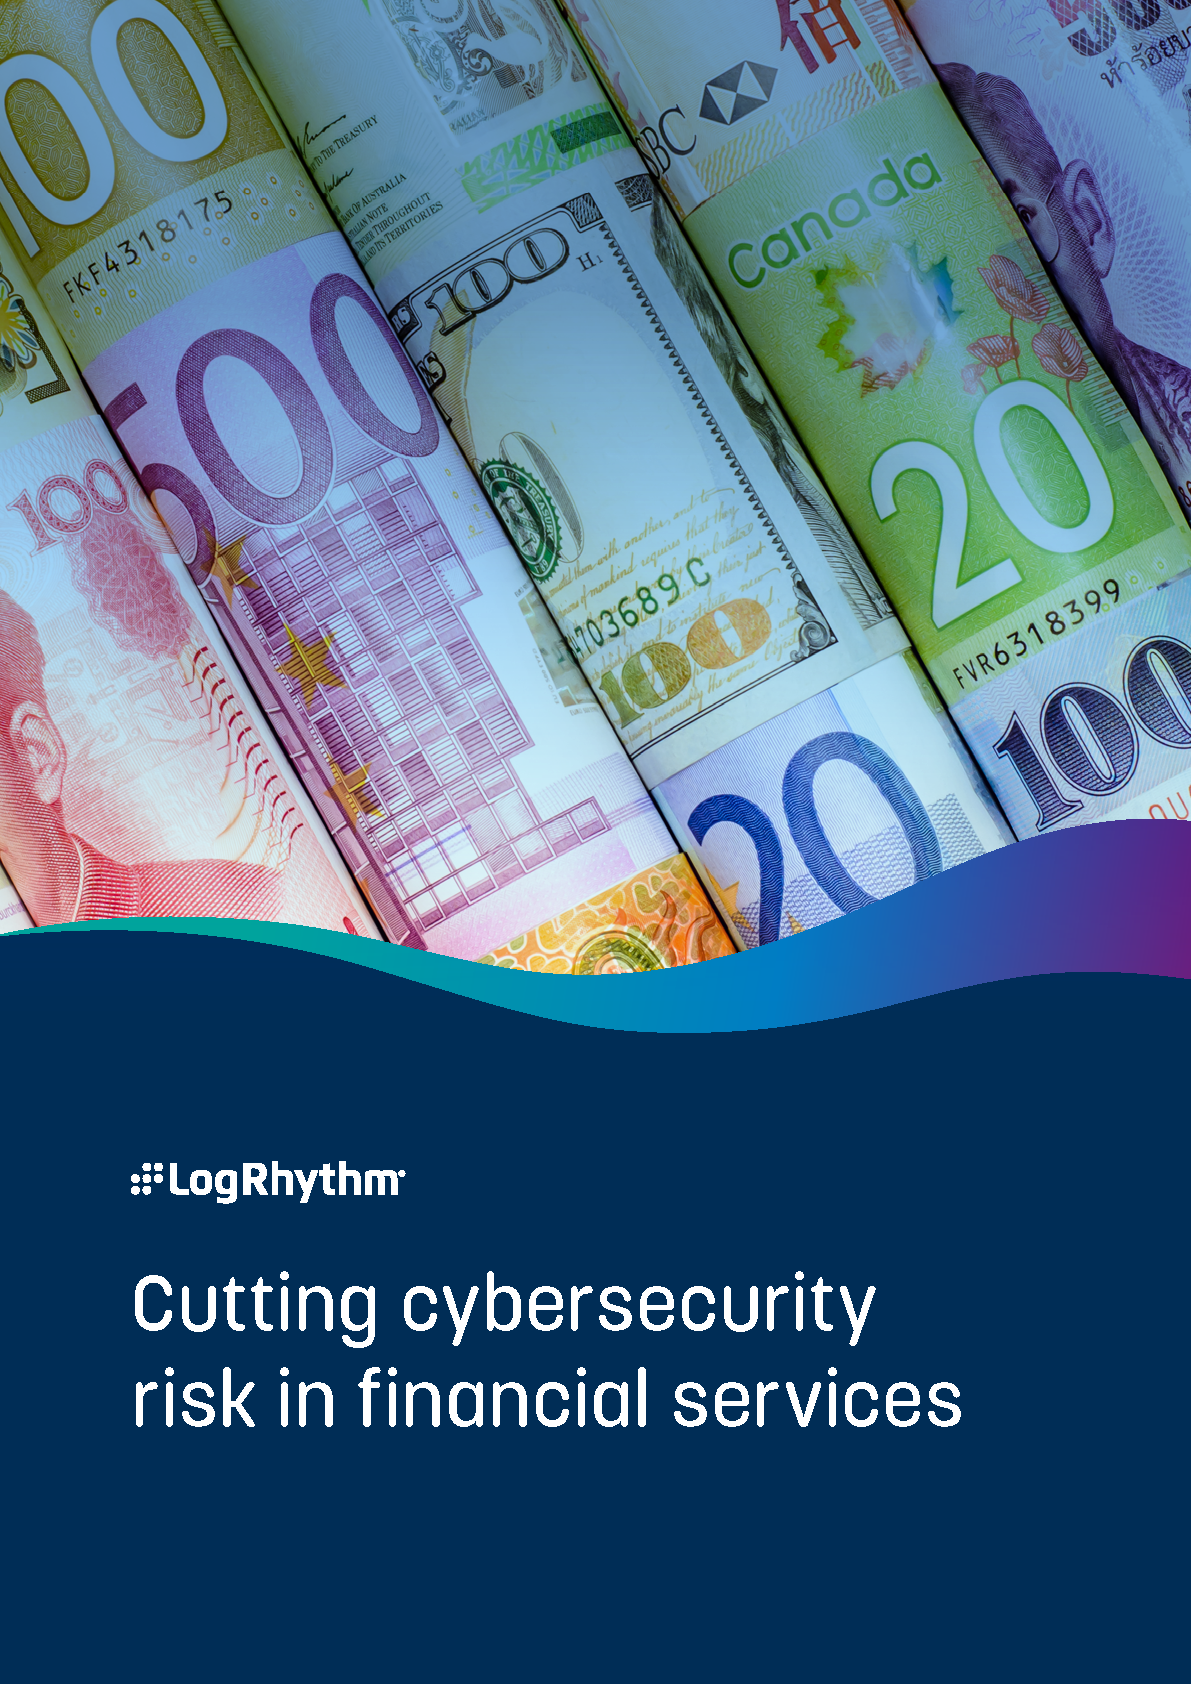 Pages from uk-white-paper-cutting-cybersecurity-risk-in-financial-services